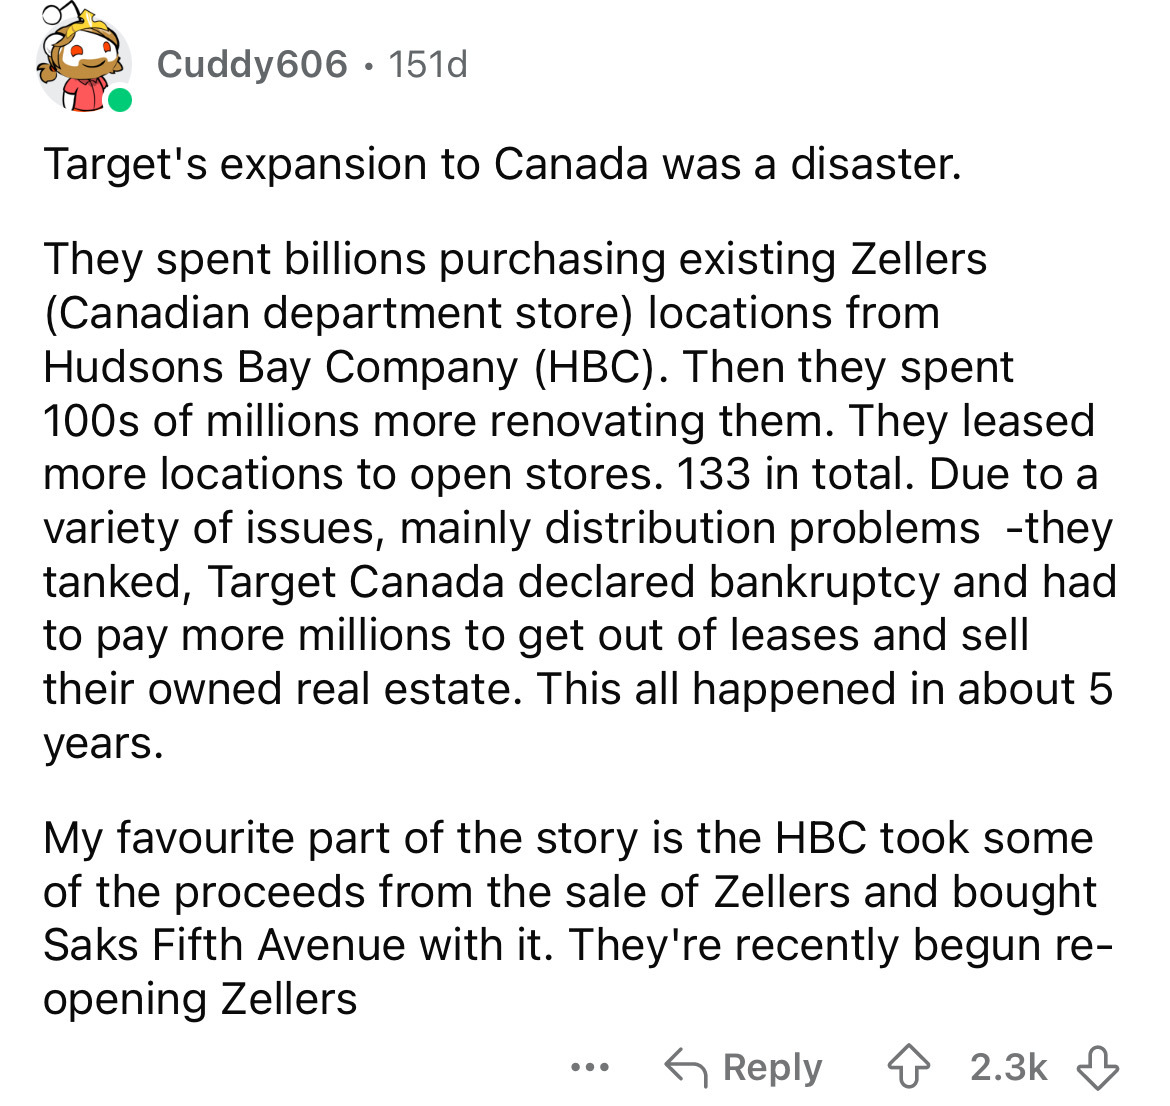 document - Cuddy606 151d Target's expansion to Canada was a disaster. They spent billions purchasing existing Zellers Canadian department store locations from Hudsons Bay Company Hbc. Then they spent 100s of millions more renovating them. They leased more